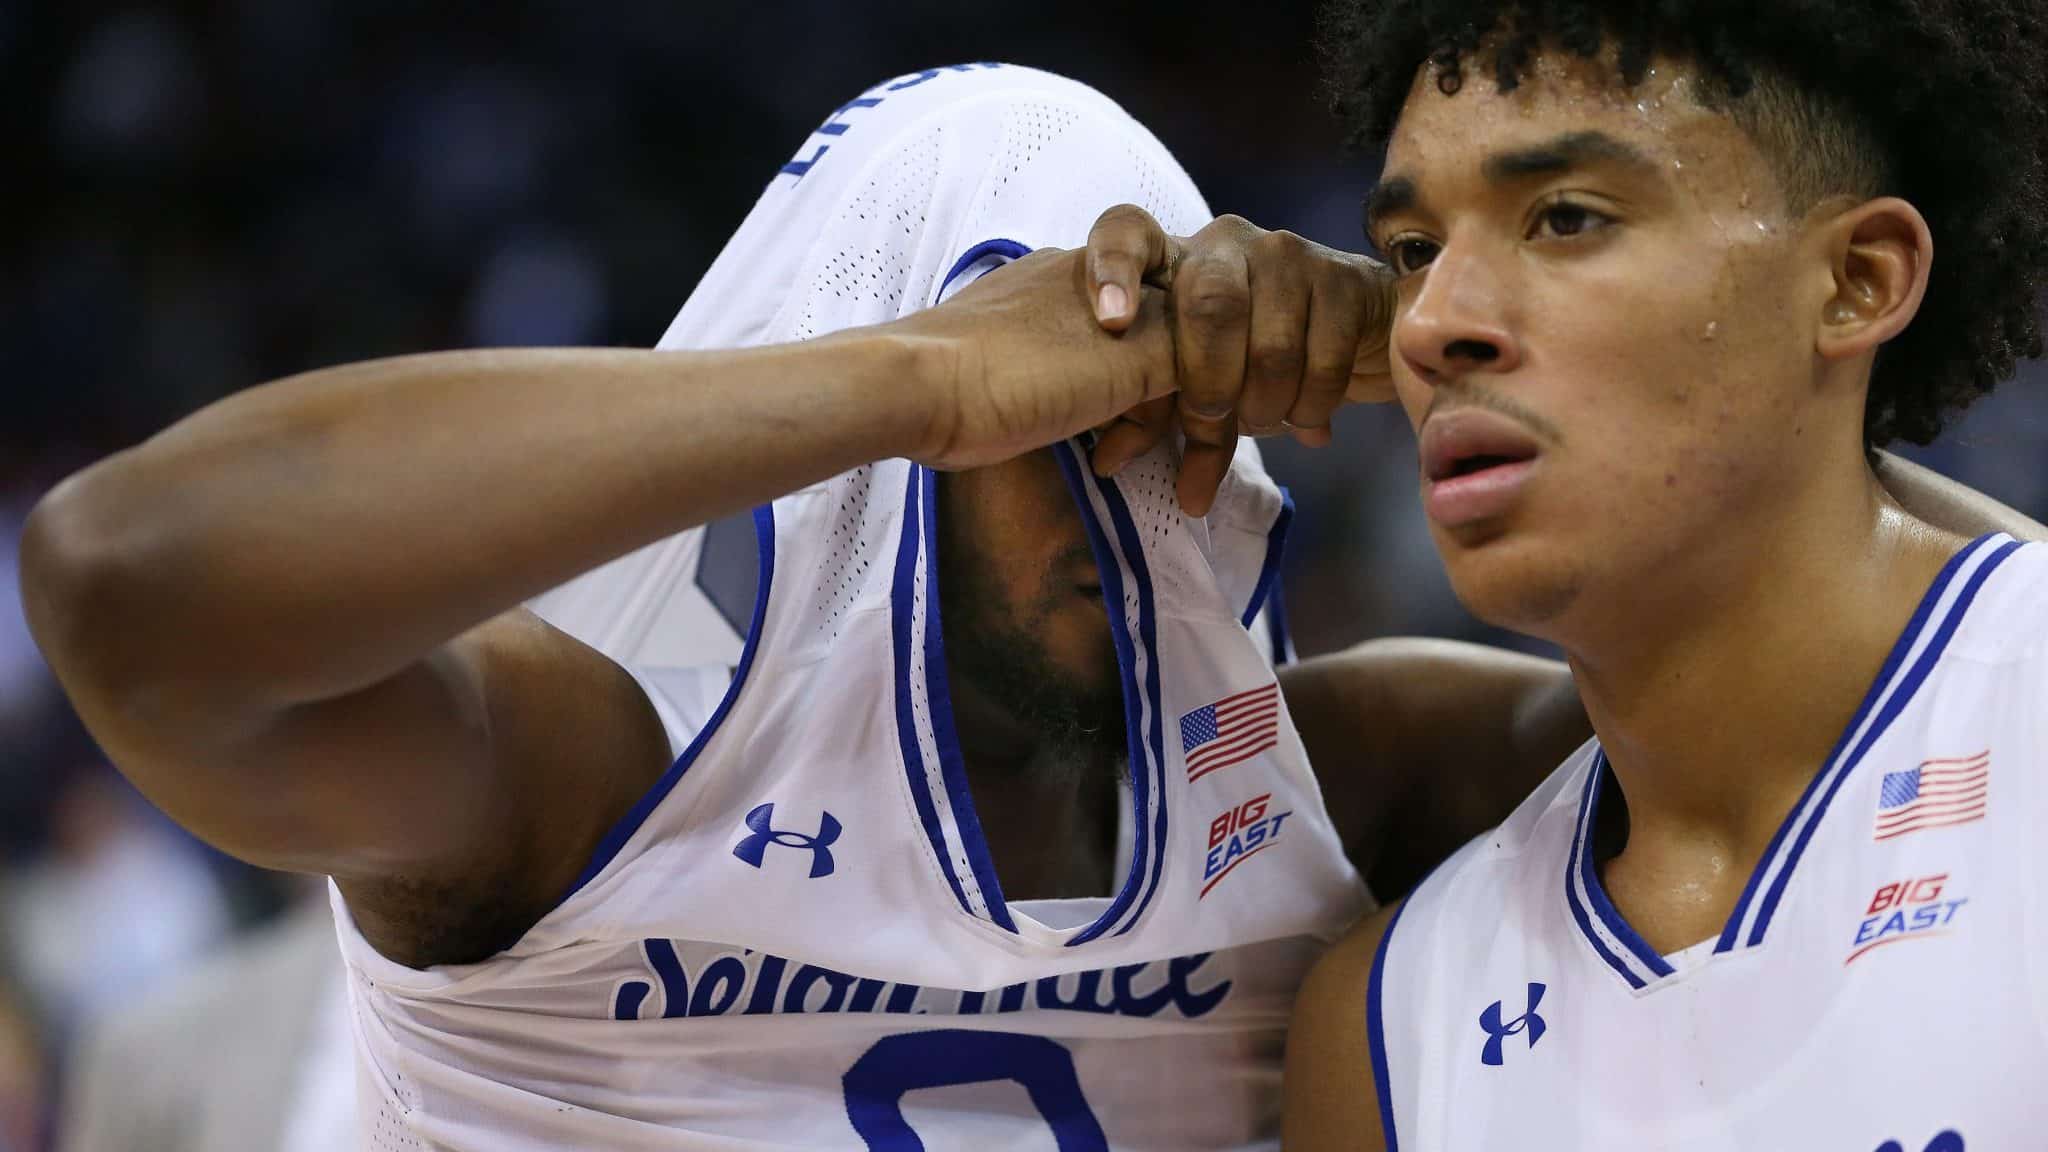 NEWARK, NJ - MARCH 04: Quincy McKnight #0 of the Seton Hall Pirates pulls his jersey over his head as he walks off the court with teammate Jared Rhoden #14 after losing to the Villanova Wildcats 79-77 in a college basketball game at Prudential Center on March 4, 2020 in Newark, New Jersey.